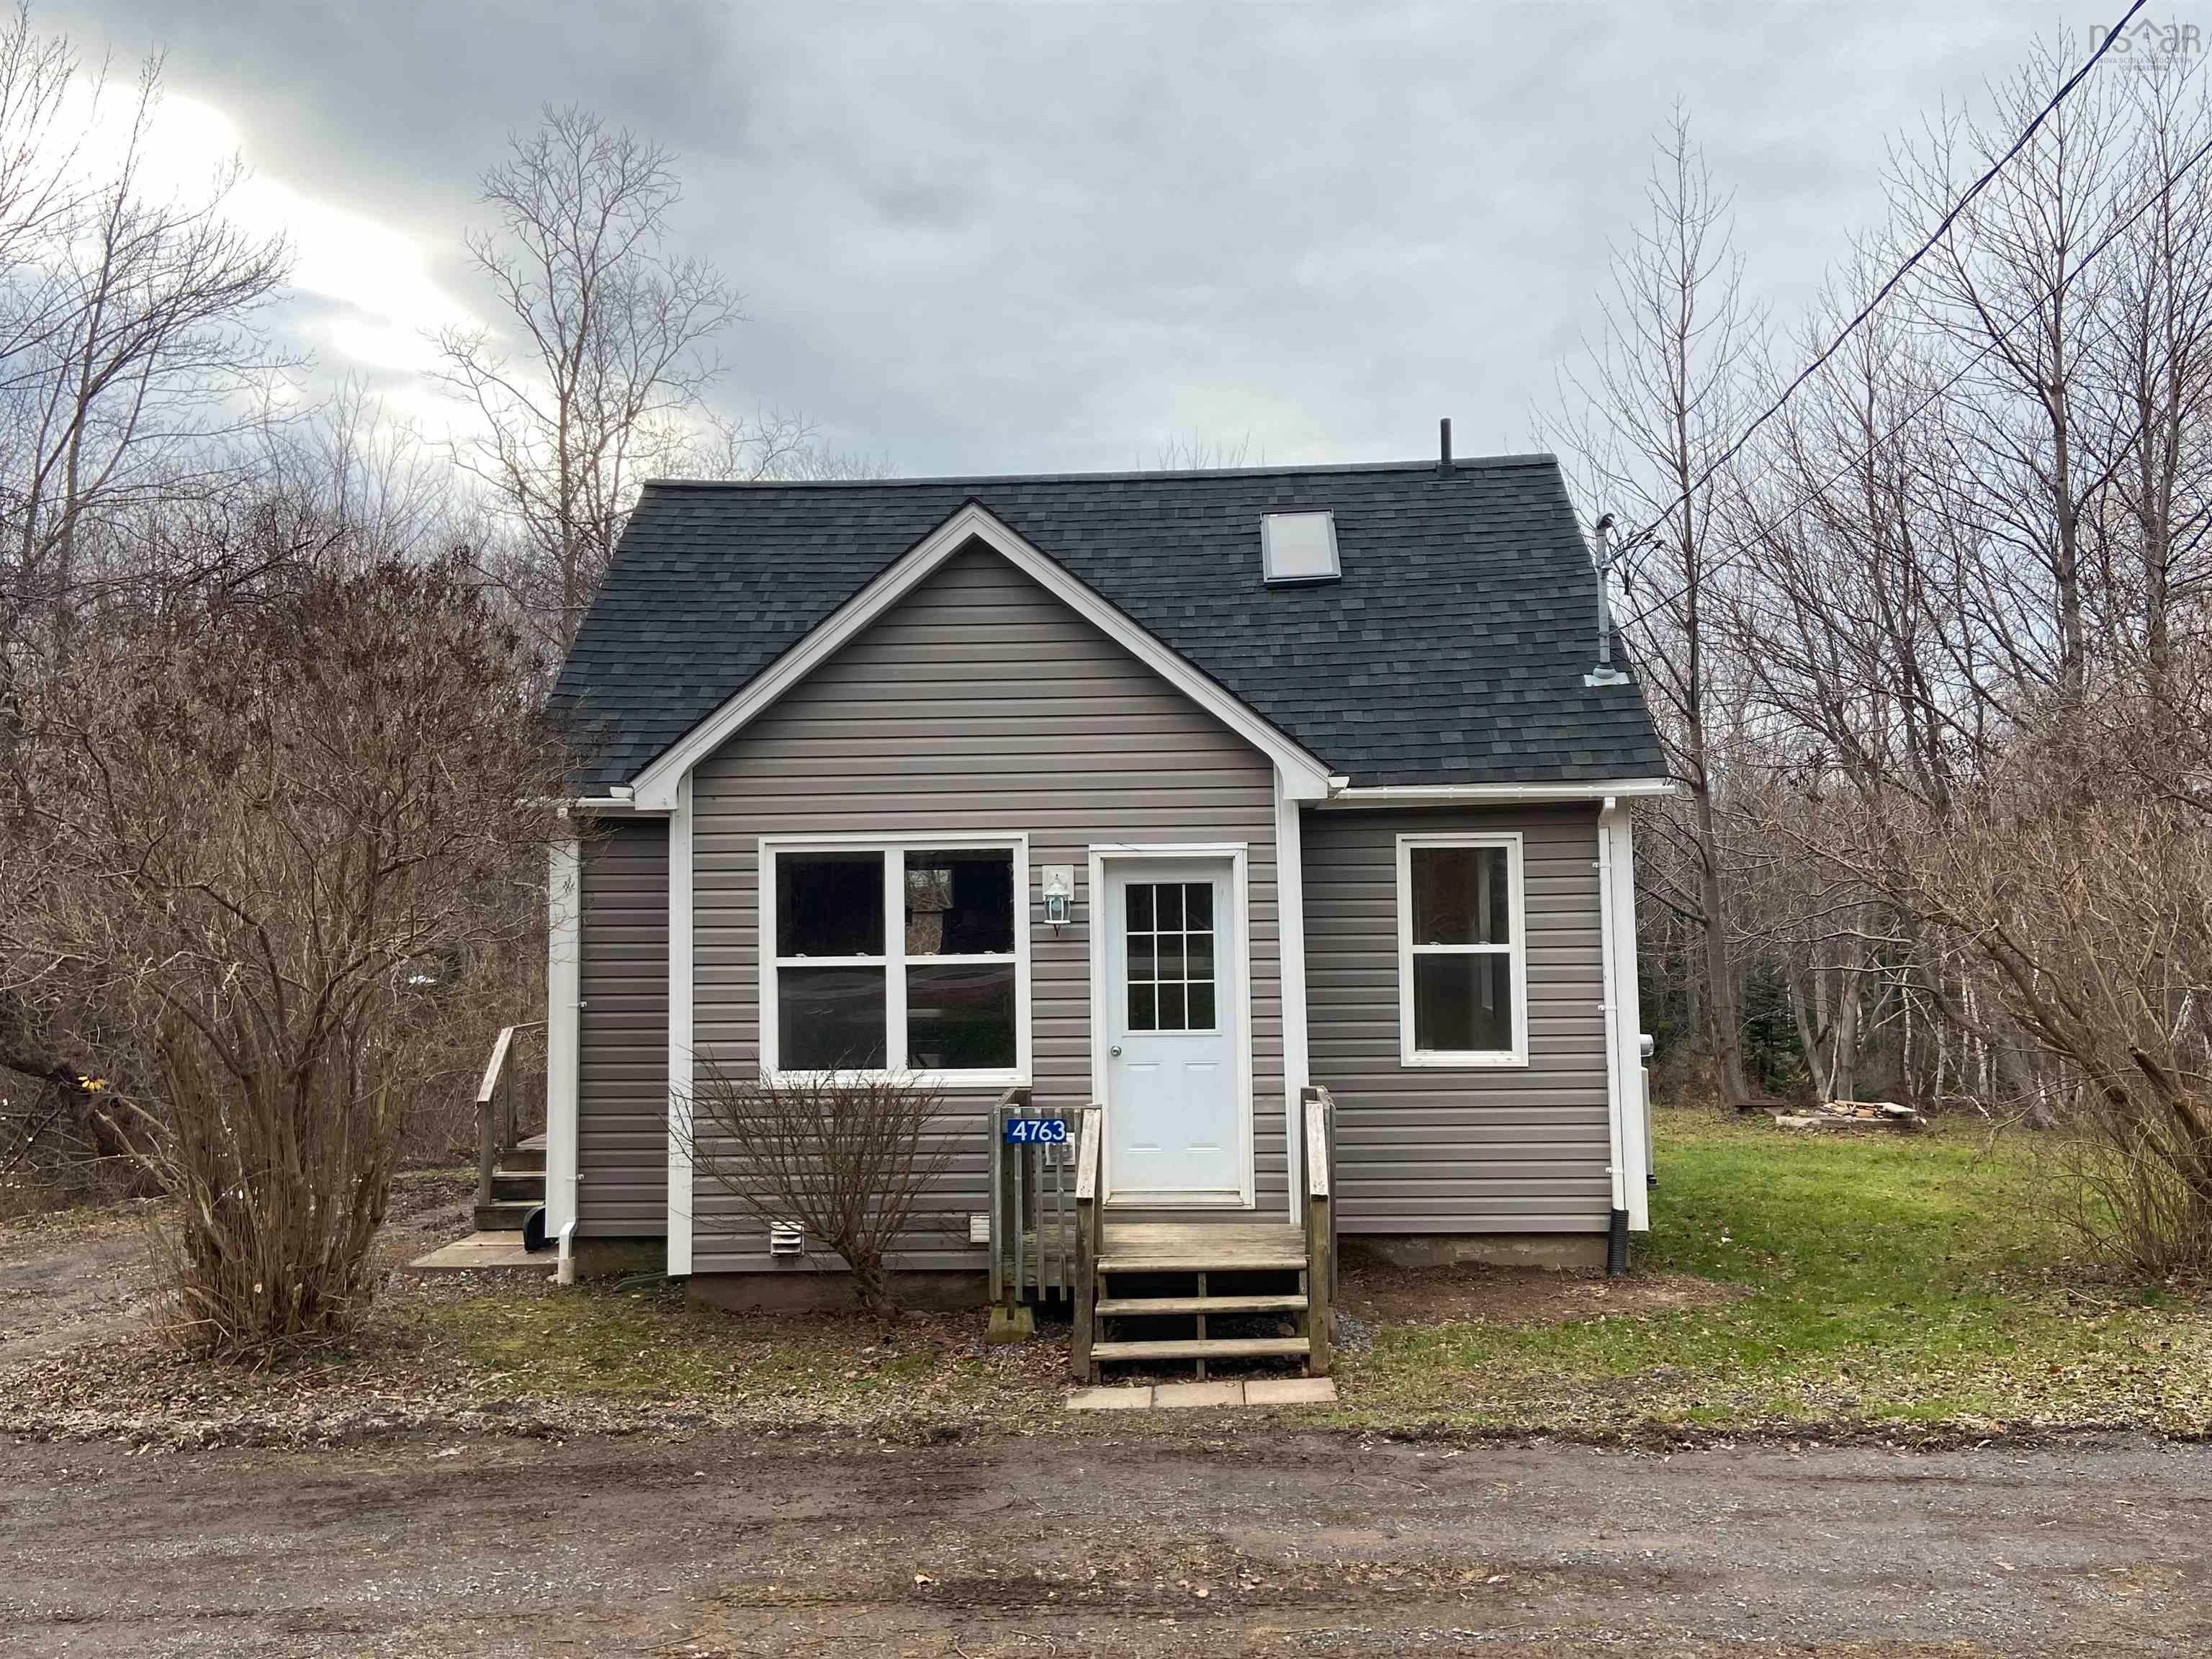 Main Photo: 4763 Pictou Landing Road in Trenton: 108-Rural Pictou County Residential for sale (Northern Region)  : MLS®# 202129780